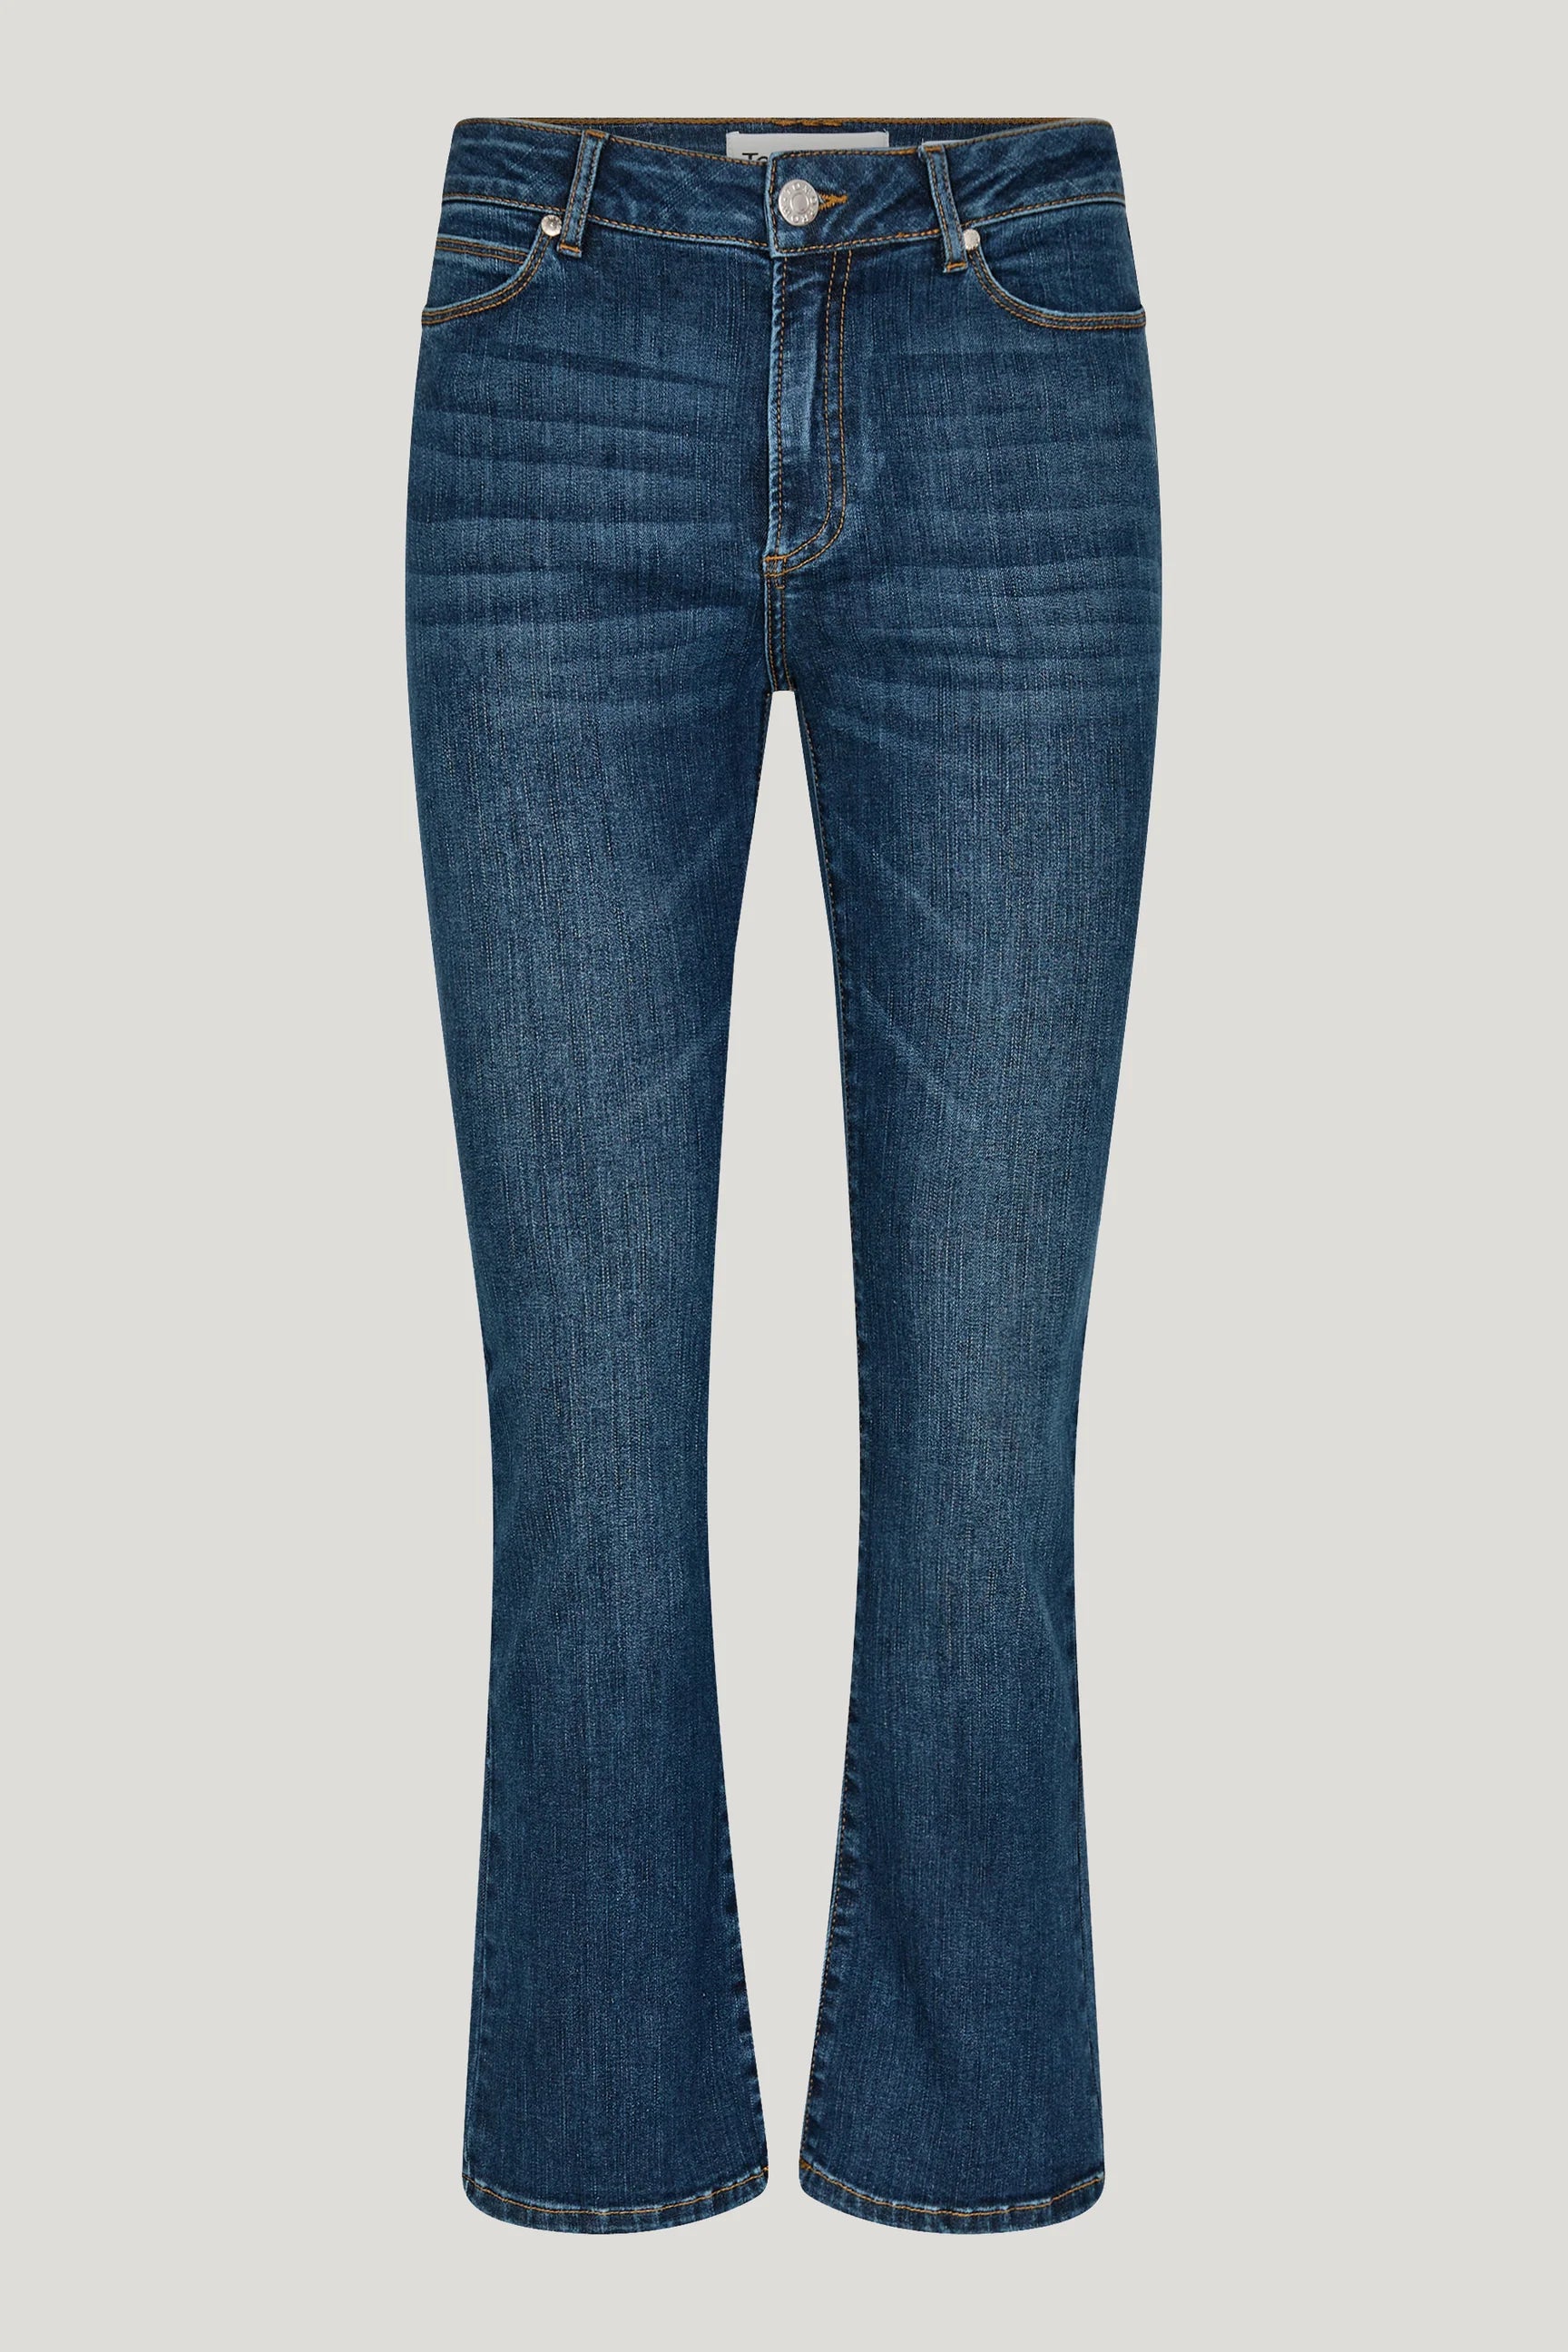 A pair of Malcolm Jeans by Tomorrow Denim with a kick flare leg.